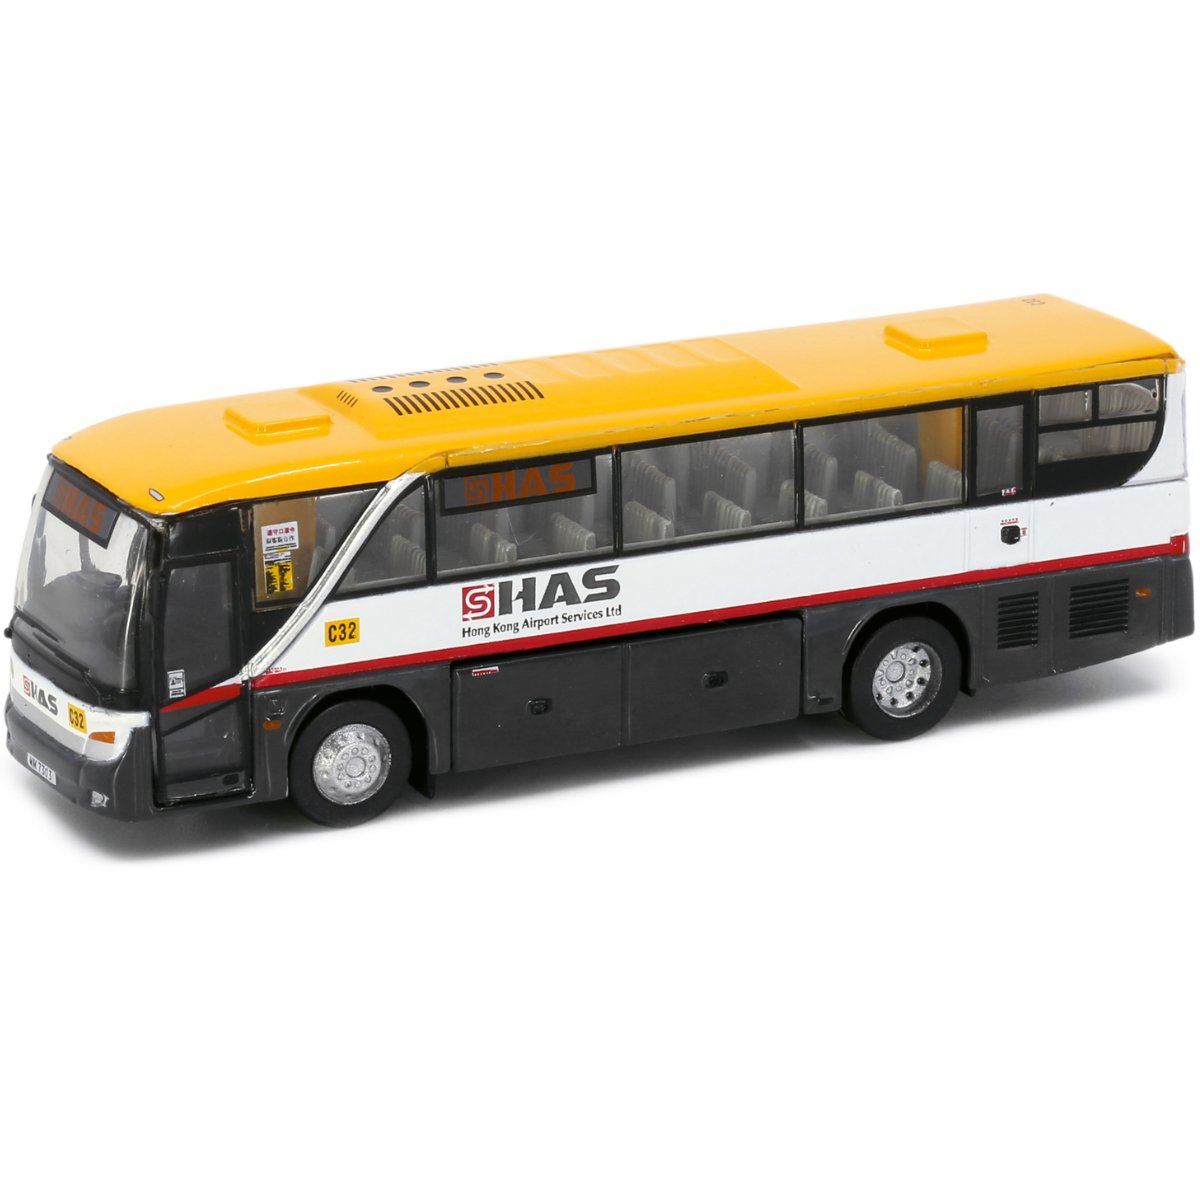 Tiny Models HAS Shuttle Bus (1:110 Scale) - Phillips Hobbies